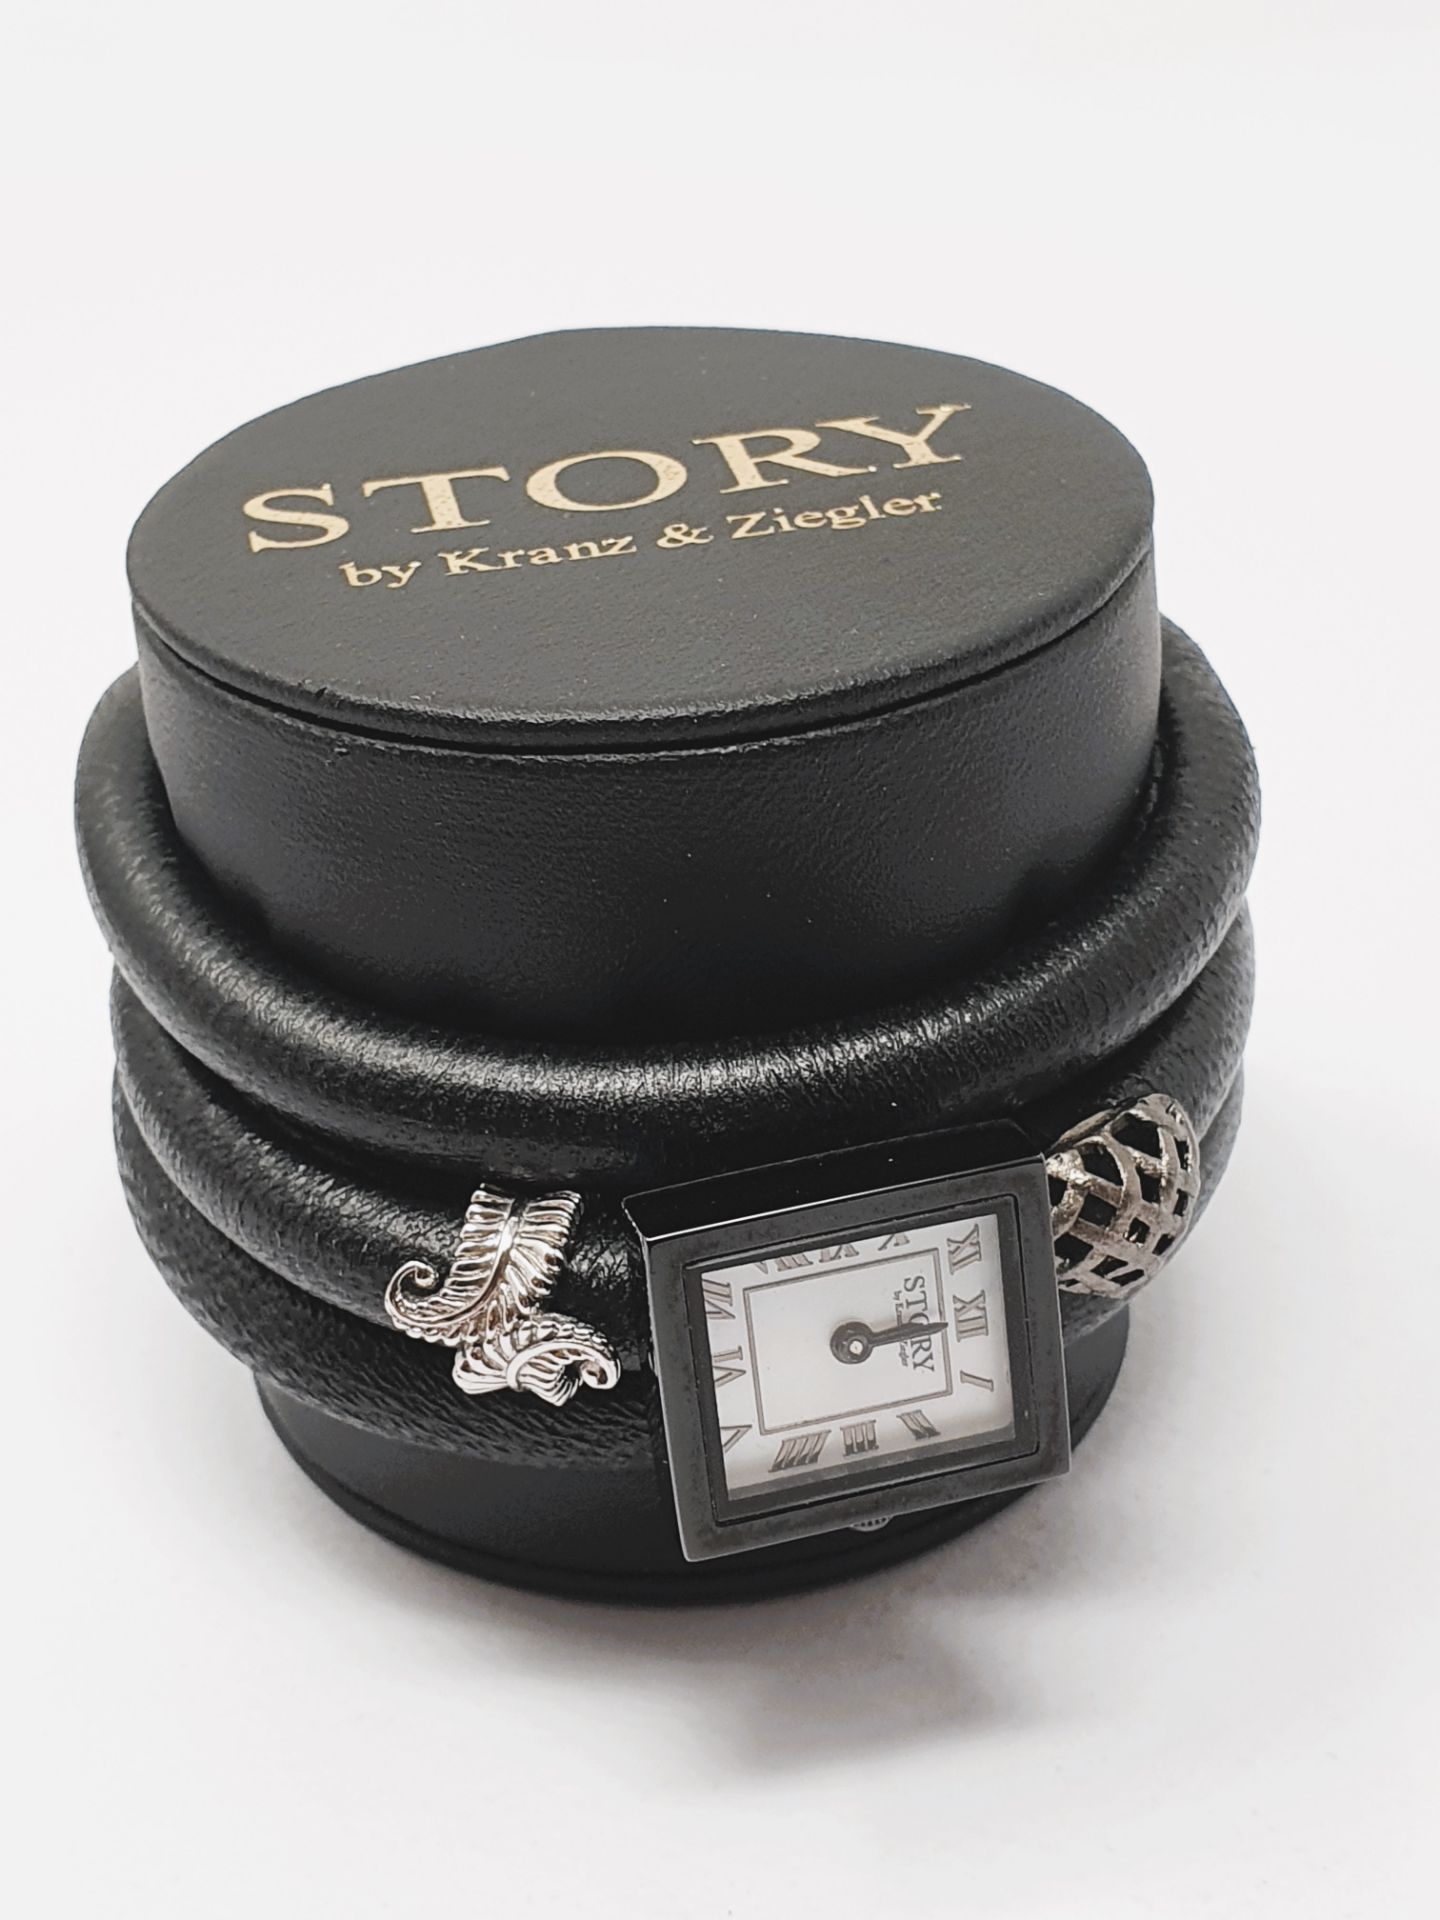 STORY' by Kranz & Ziegler black leather wrap bracelet with two sterling silver charms and watch,